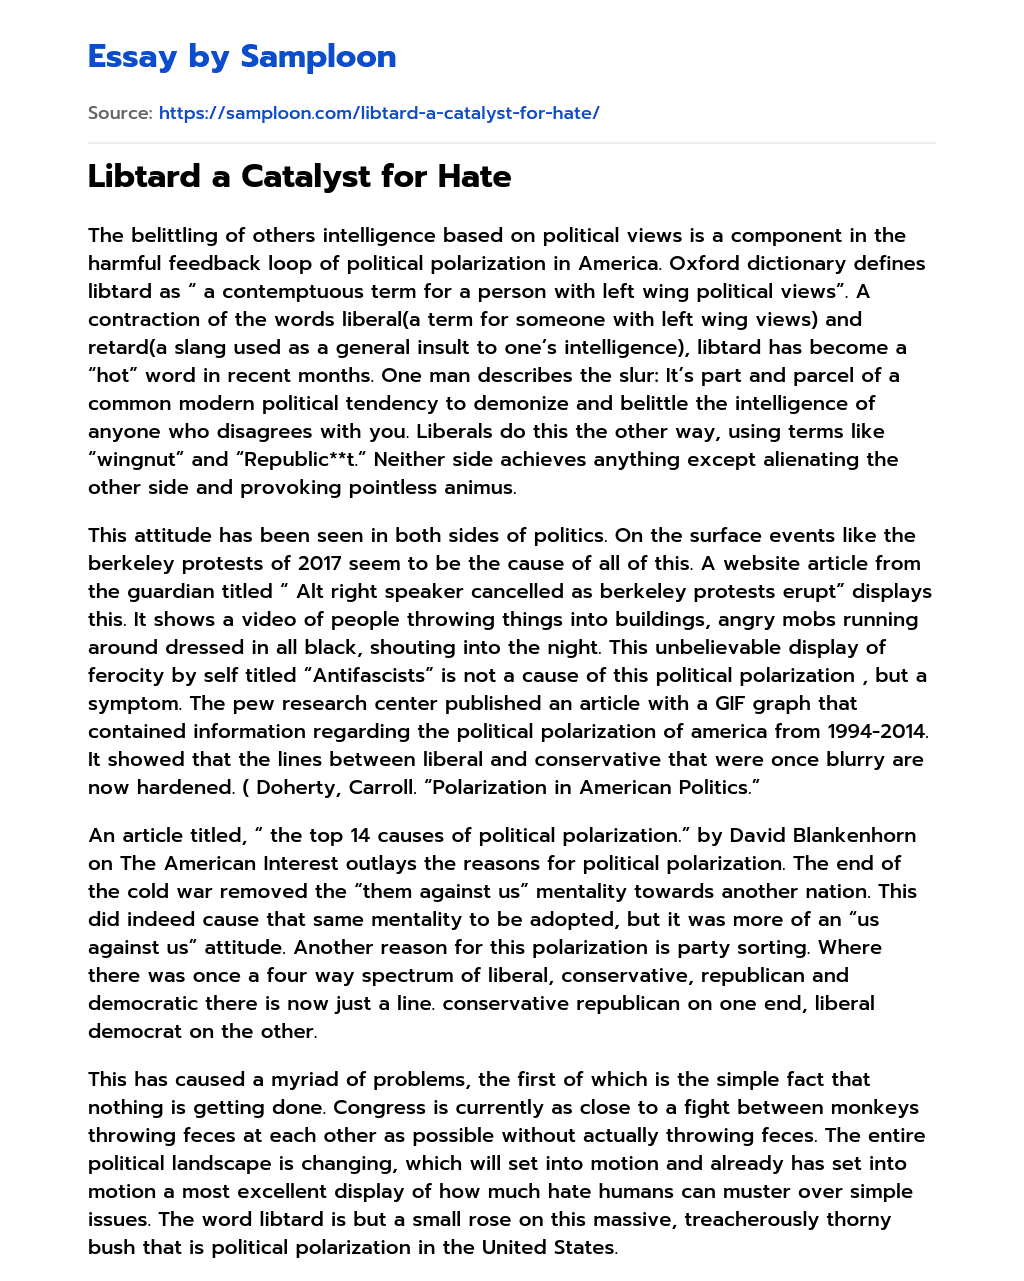 Libtard a Catalyst for Hate essay